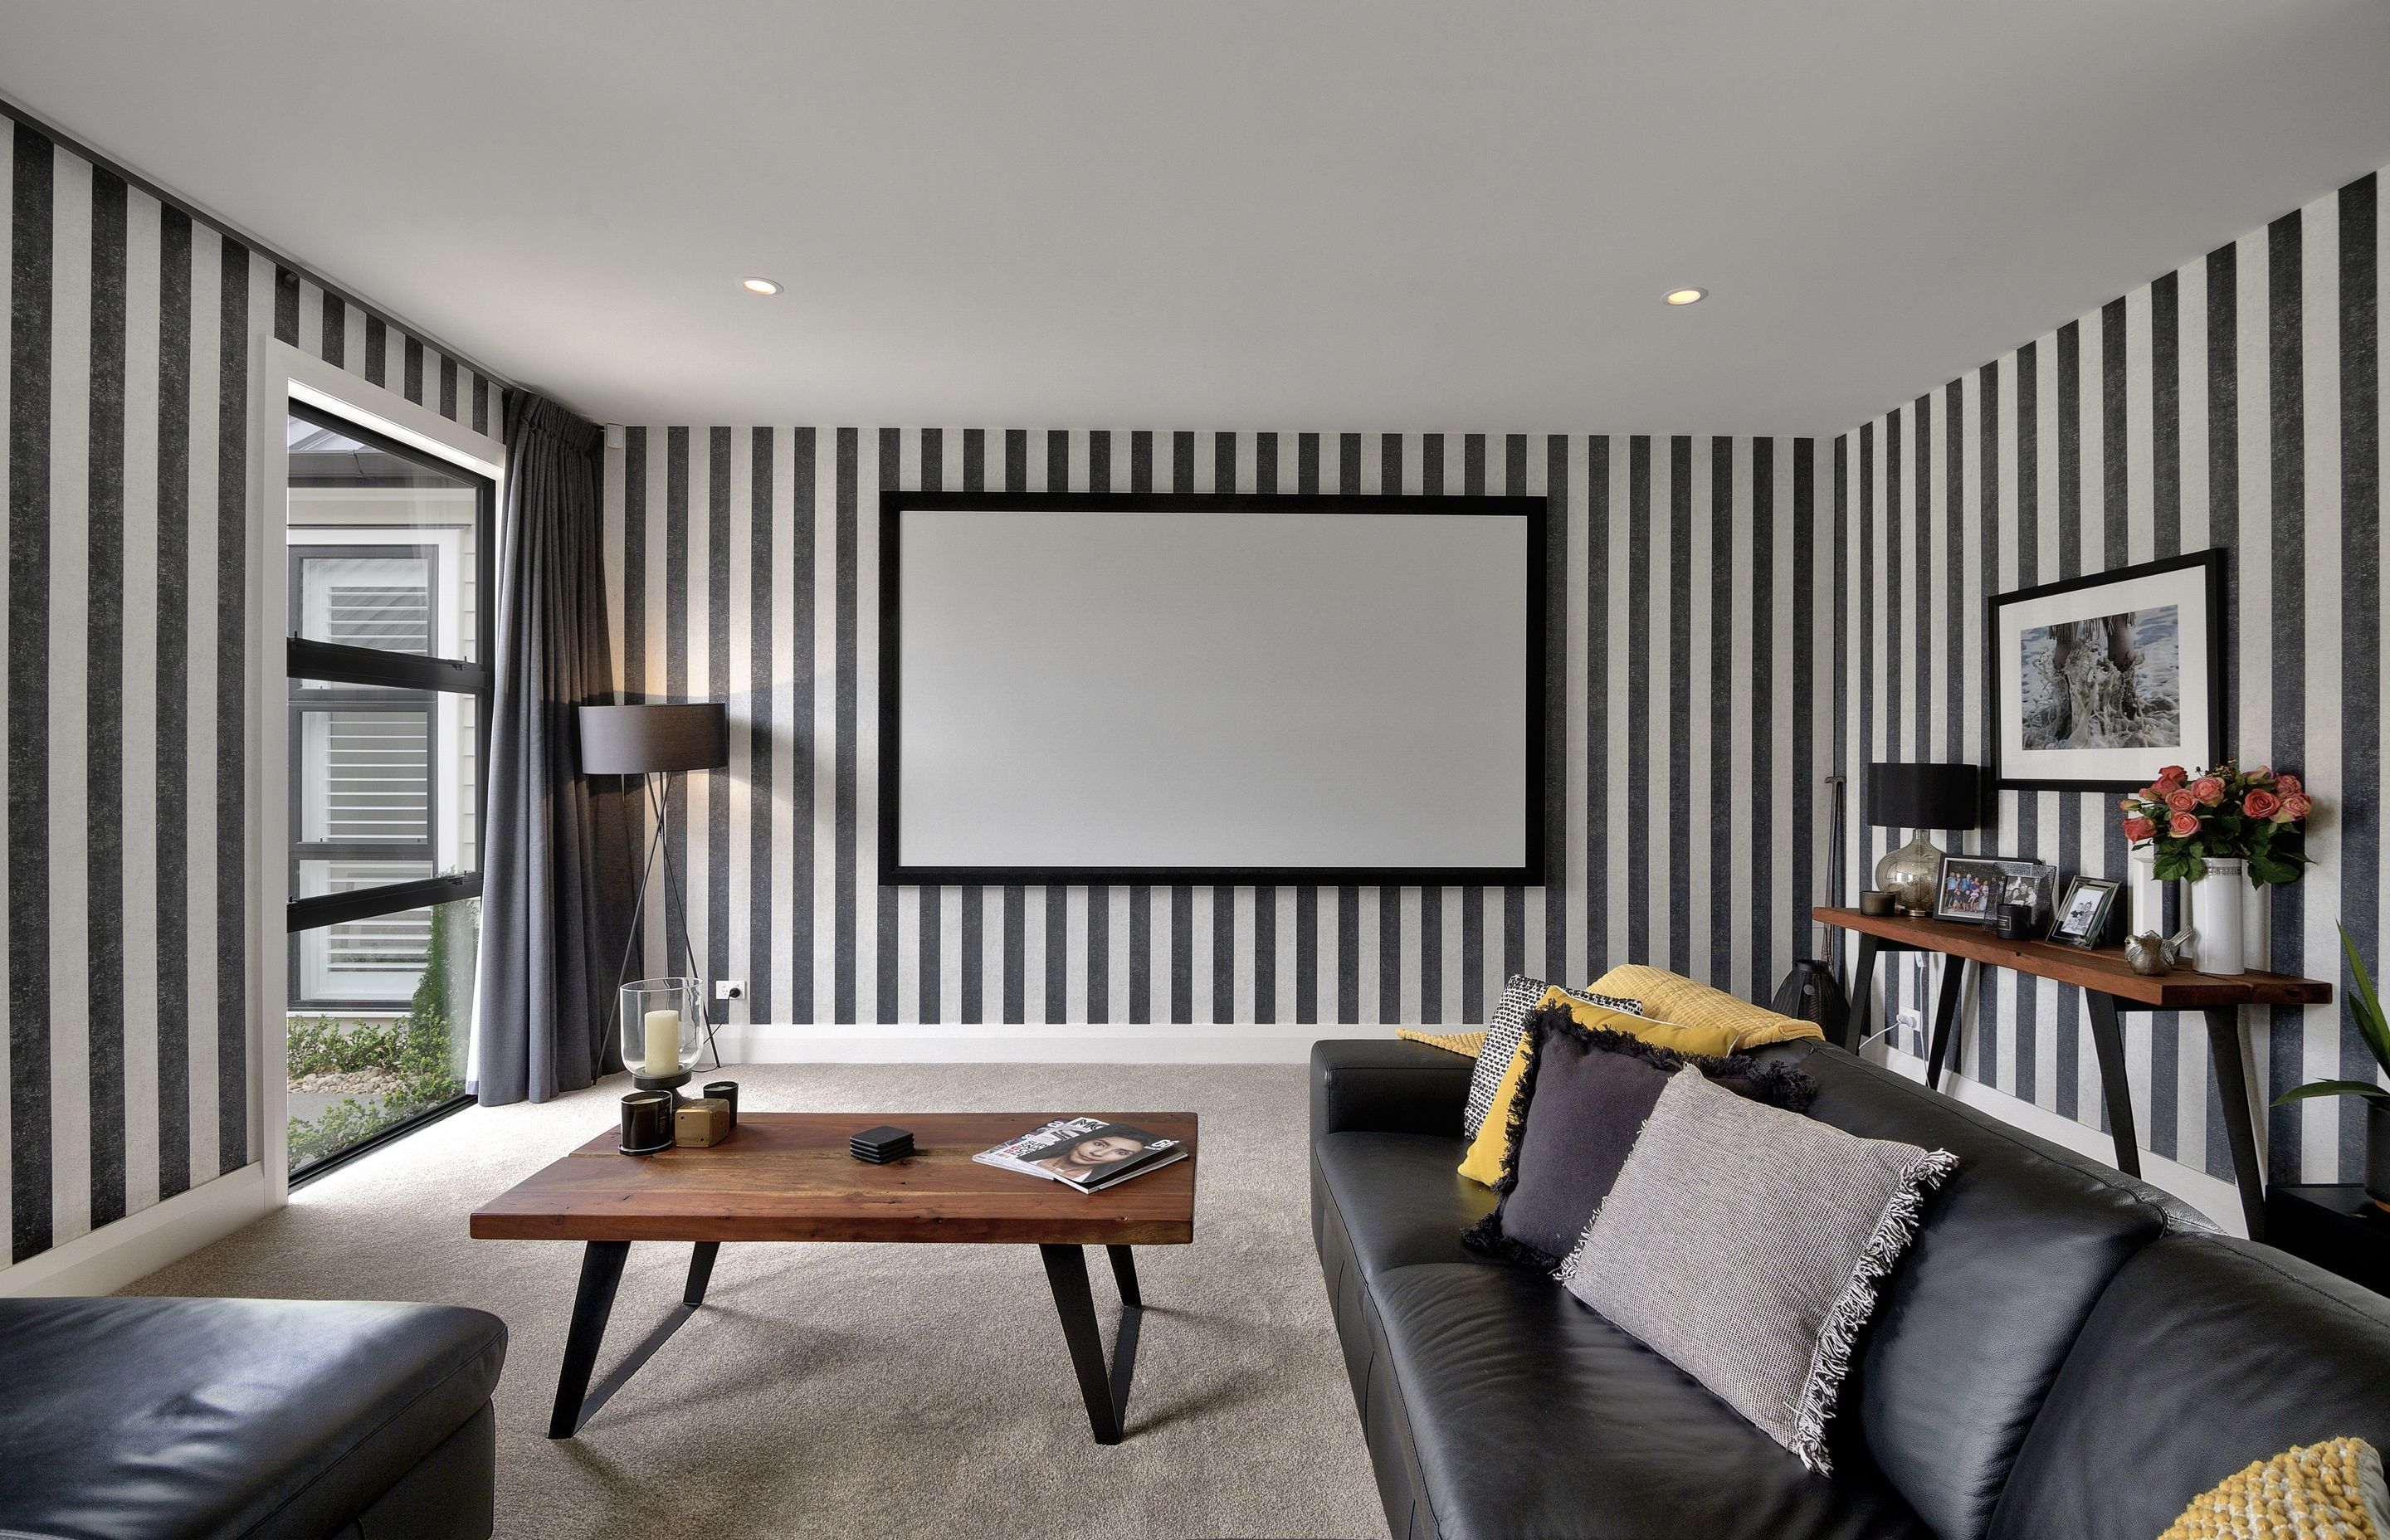 Soundproofing of the media room and insulated internal walls keeps noise contained, allowing lively entertainment and quiet conversation to harmoniously co-exist.